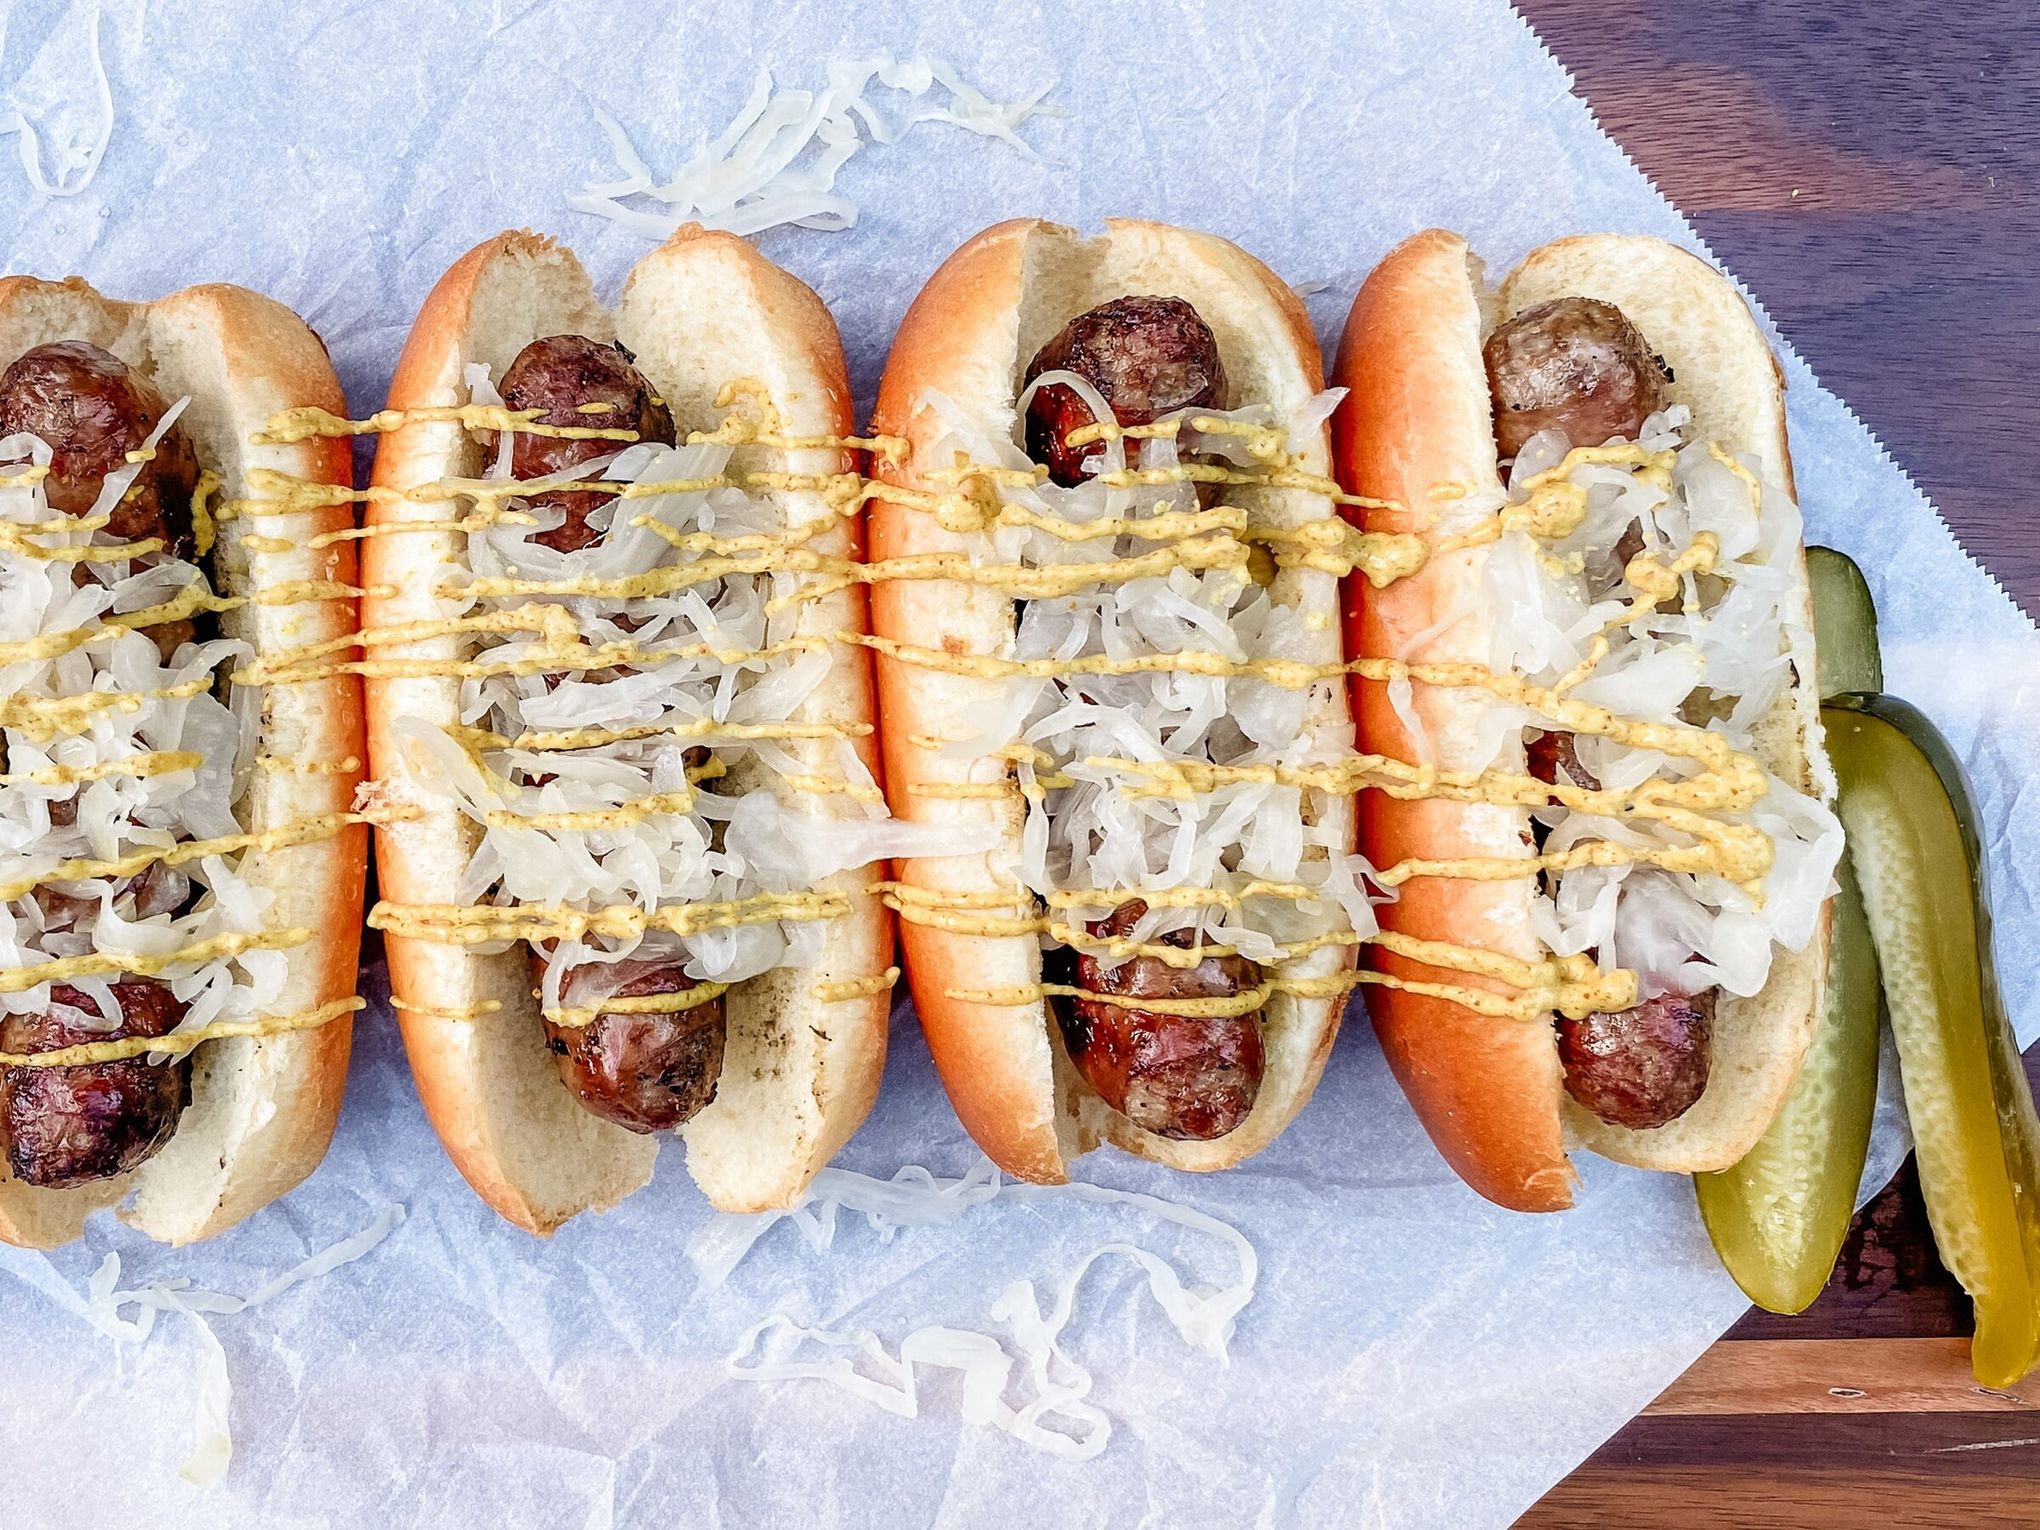 Gourmet Hot Dogs – a Bratwurst special – The Sausage Man